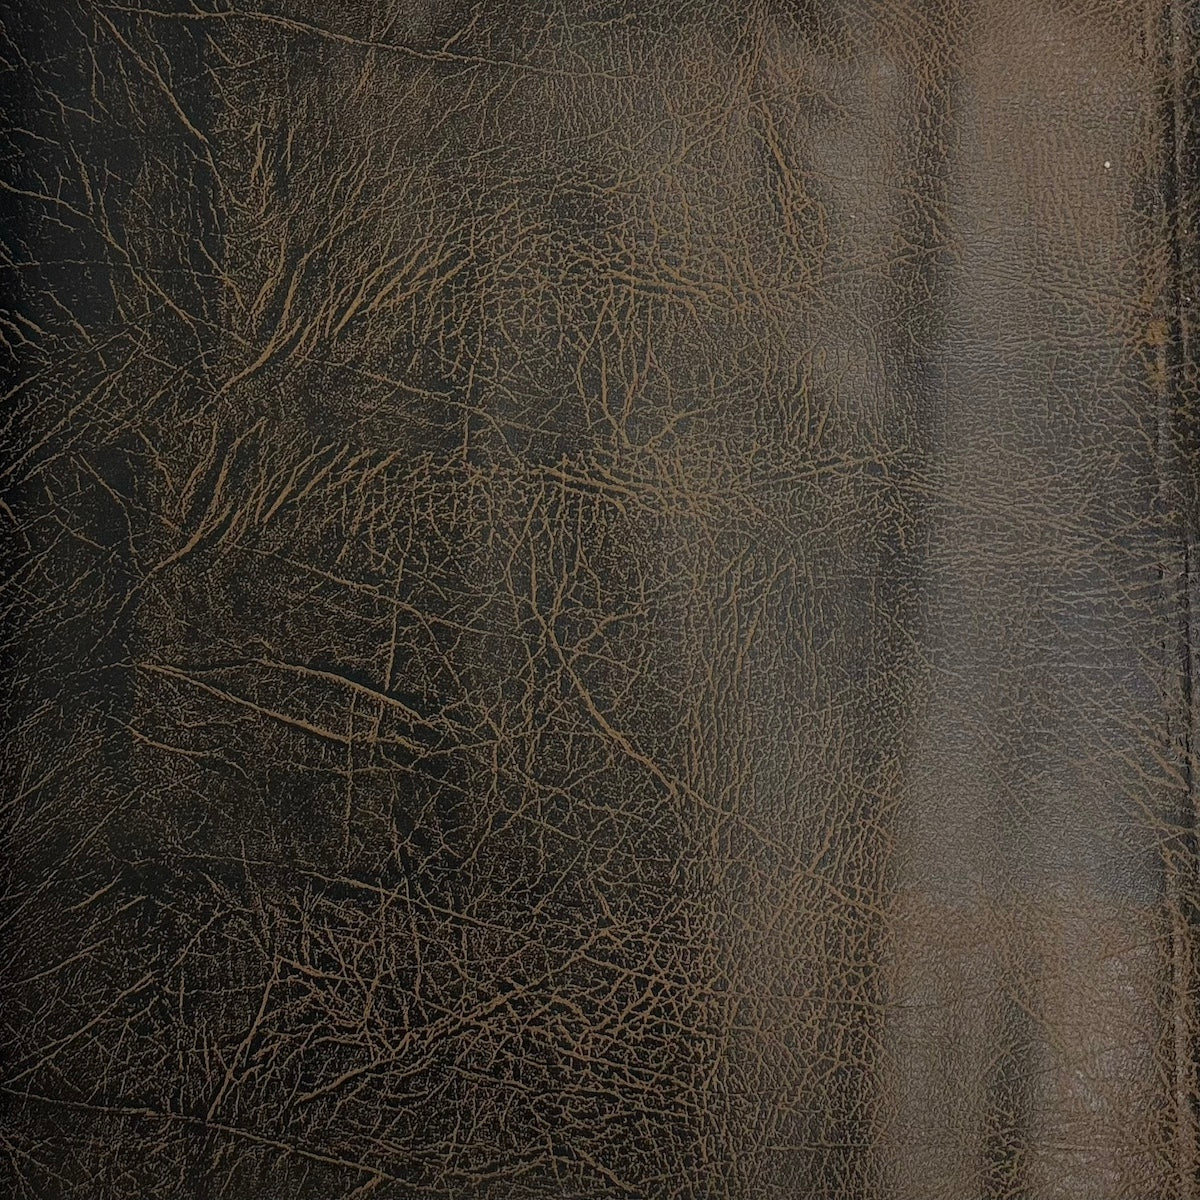 Brown Vintage Distressed Faux Leather Suede Vinyl Fabric